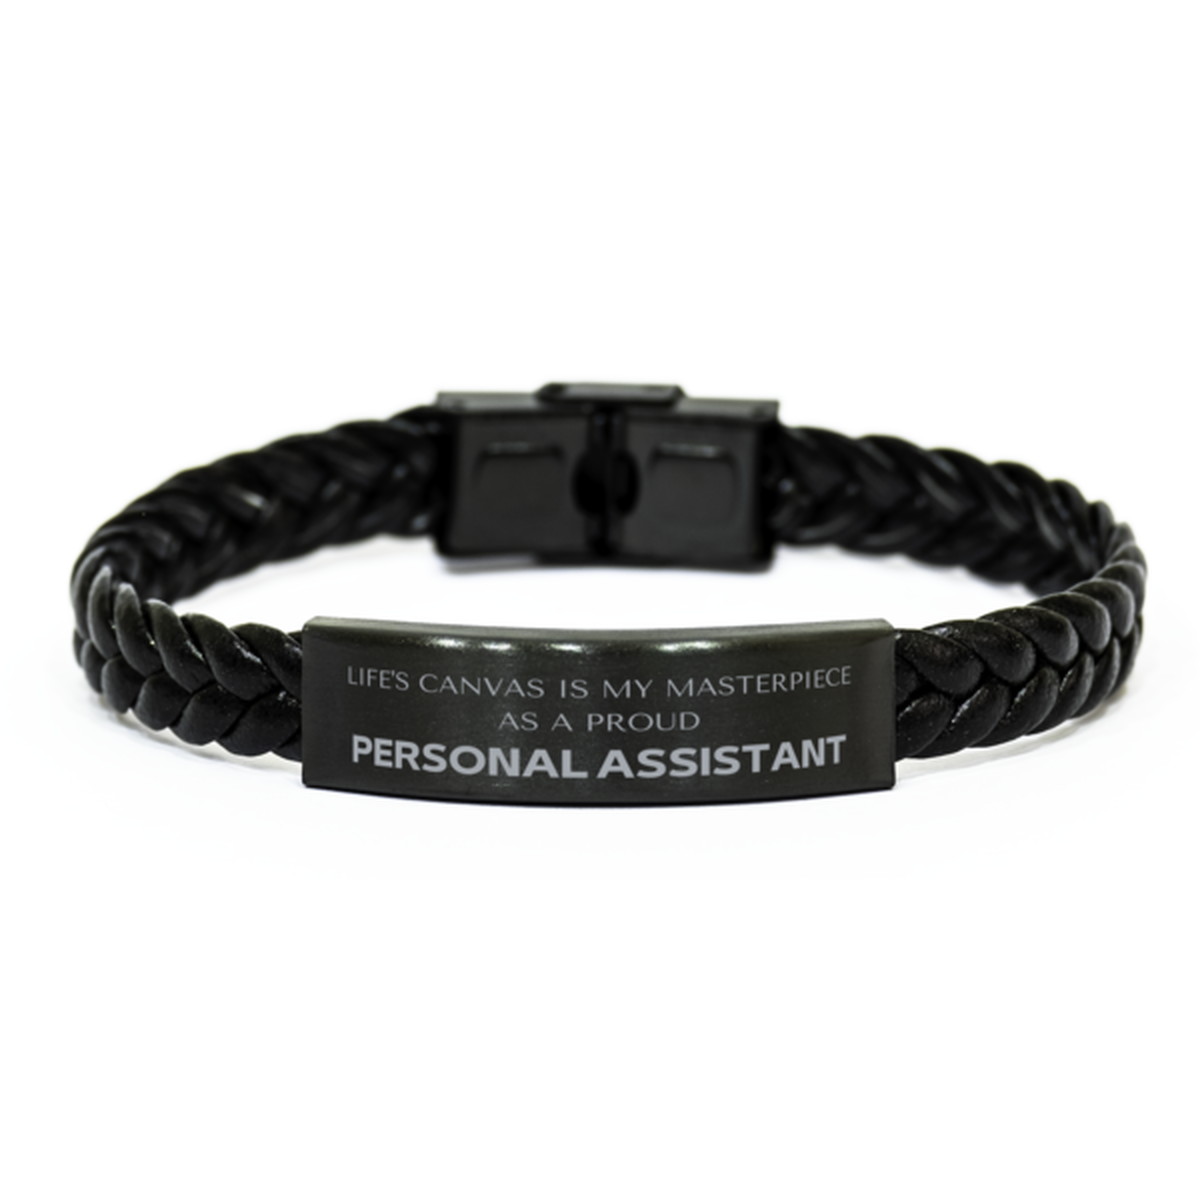 Proud Personal Assistant Gifts, Life's canvas is my masterpiece, Epic Birthday Christmas Unique Braided Leather Bracelet For Personal Assistant, Coworkers, Men, Women, Friends